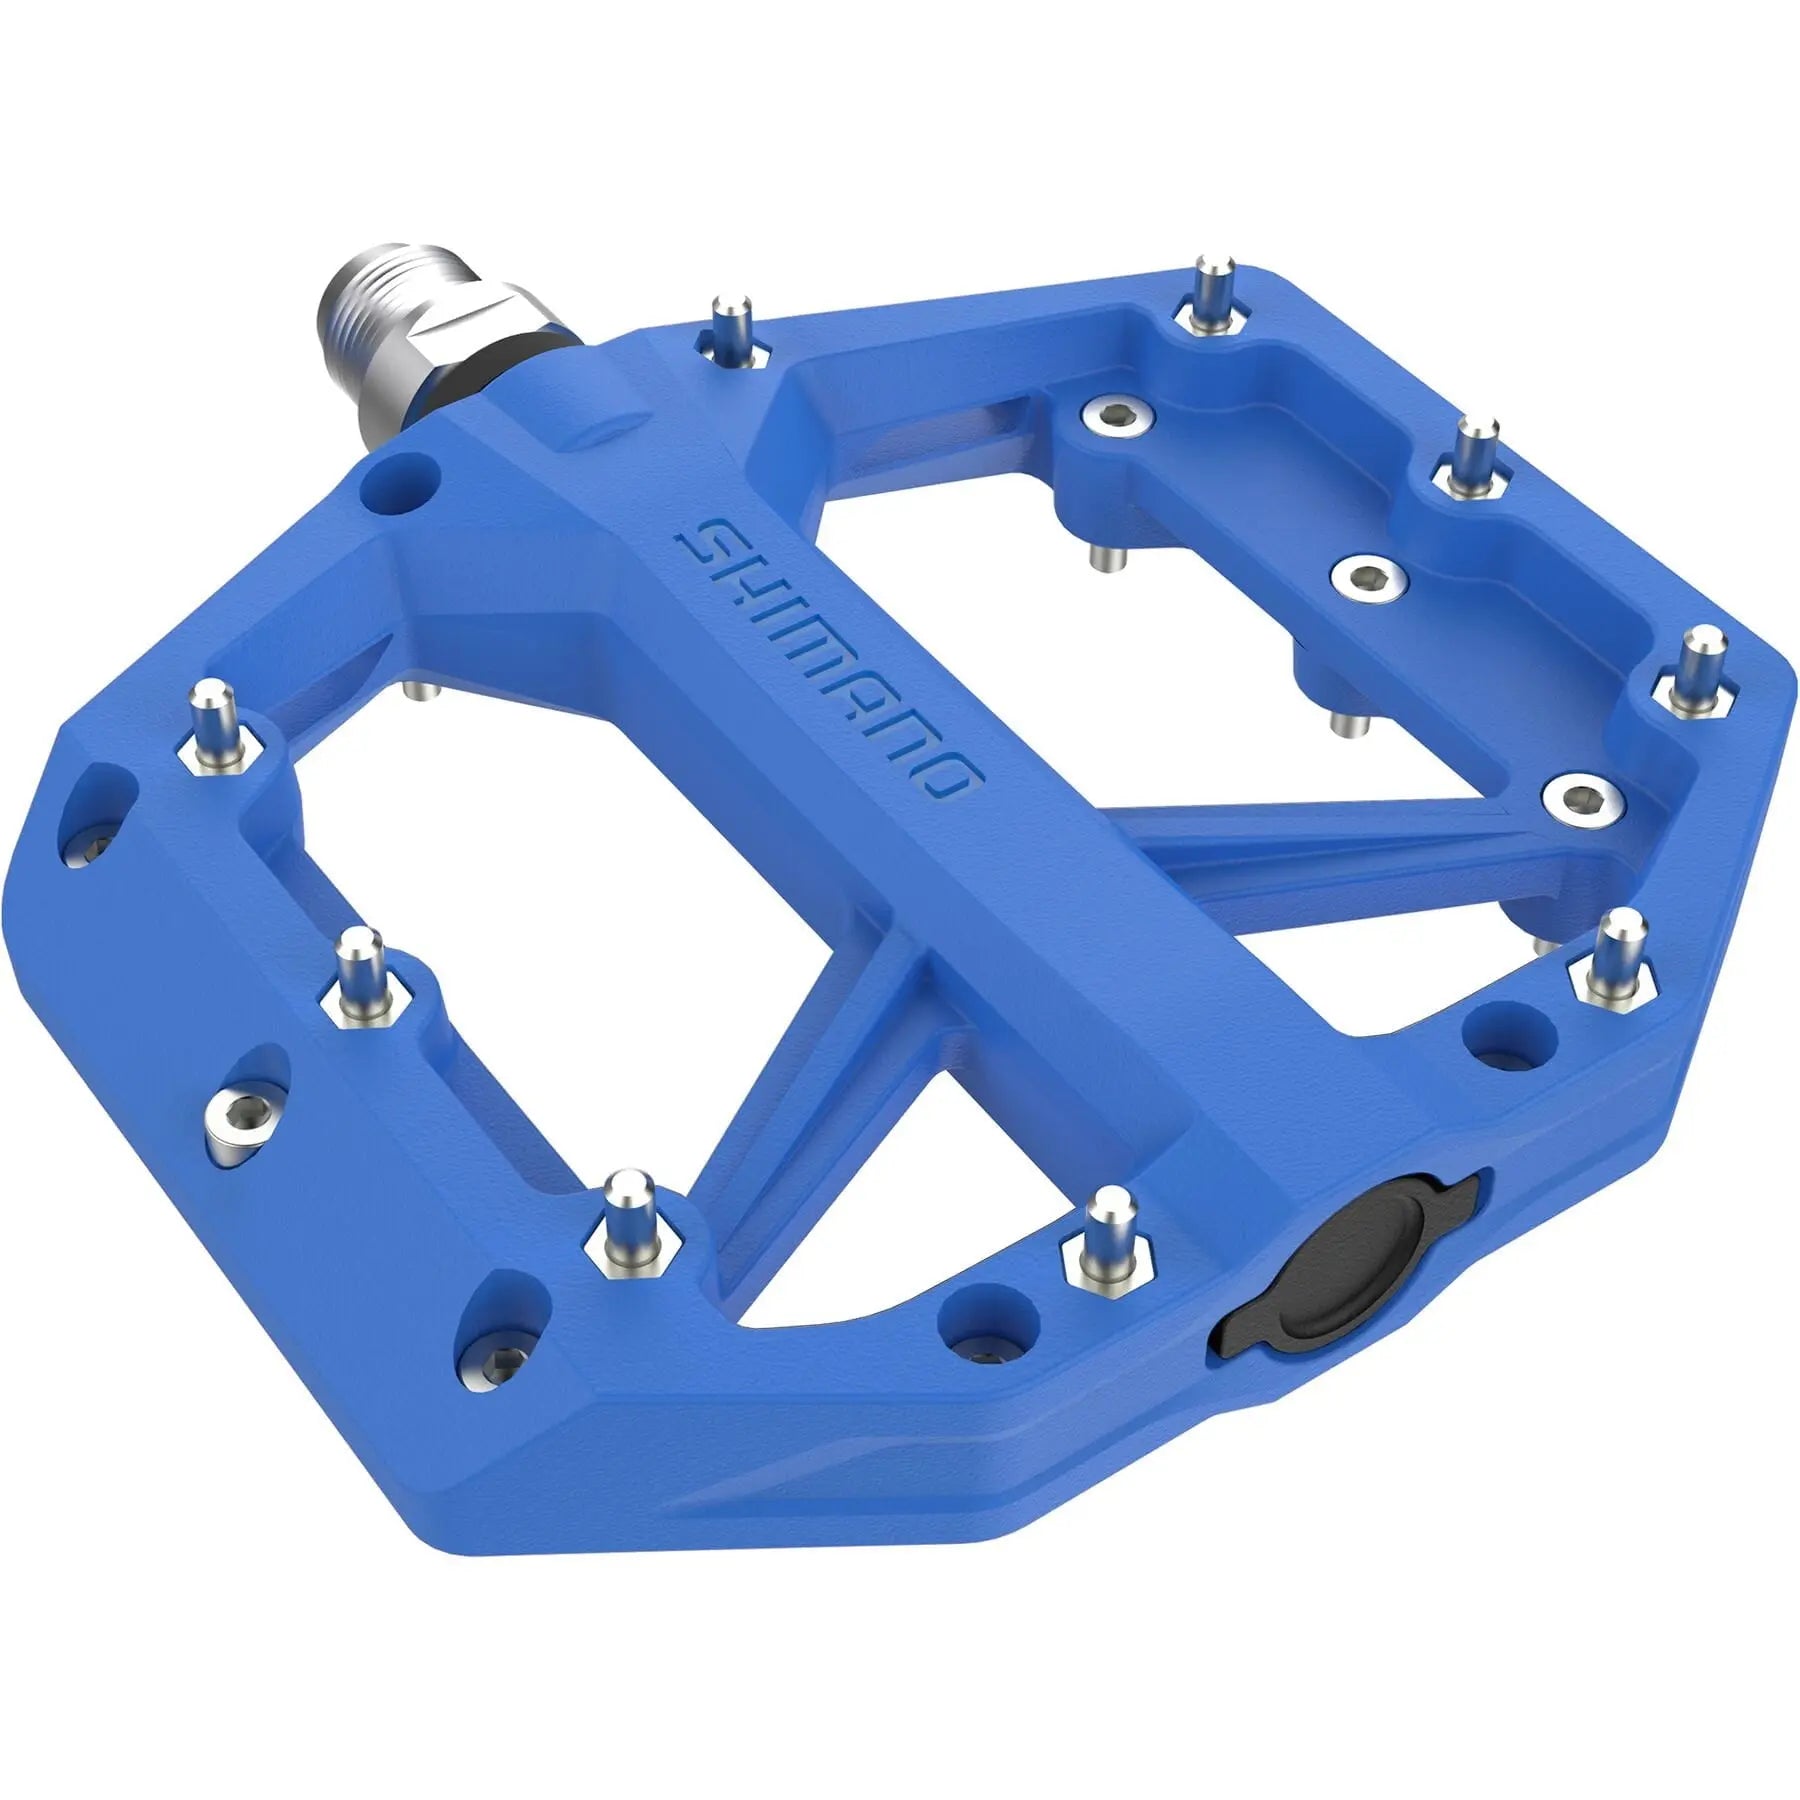 PD-GR400 flat pedals, resin with pins, blue Shimano